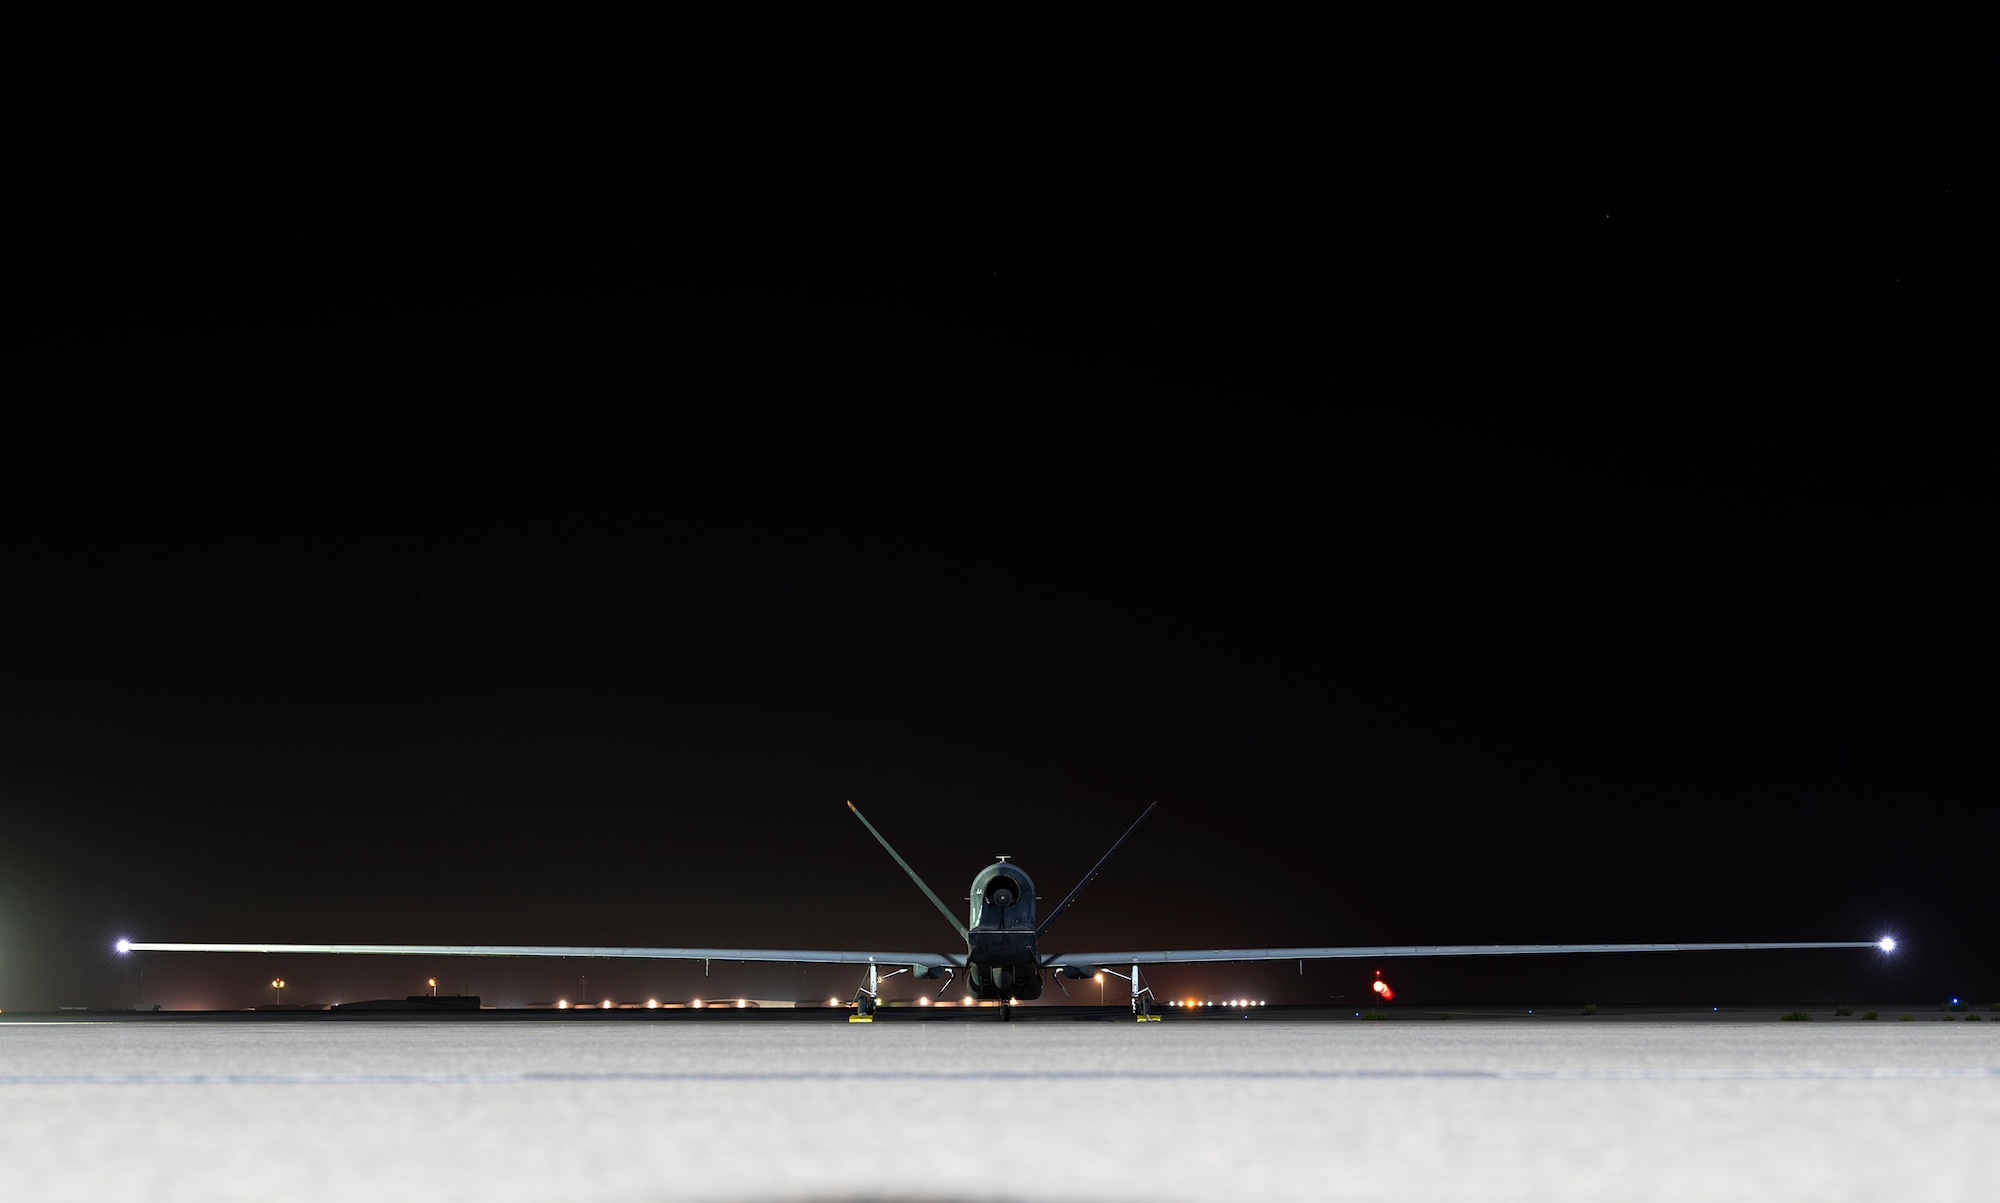 Night owl maintainers launch Global Hawks